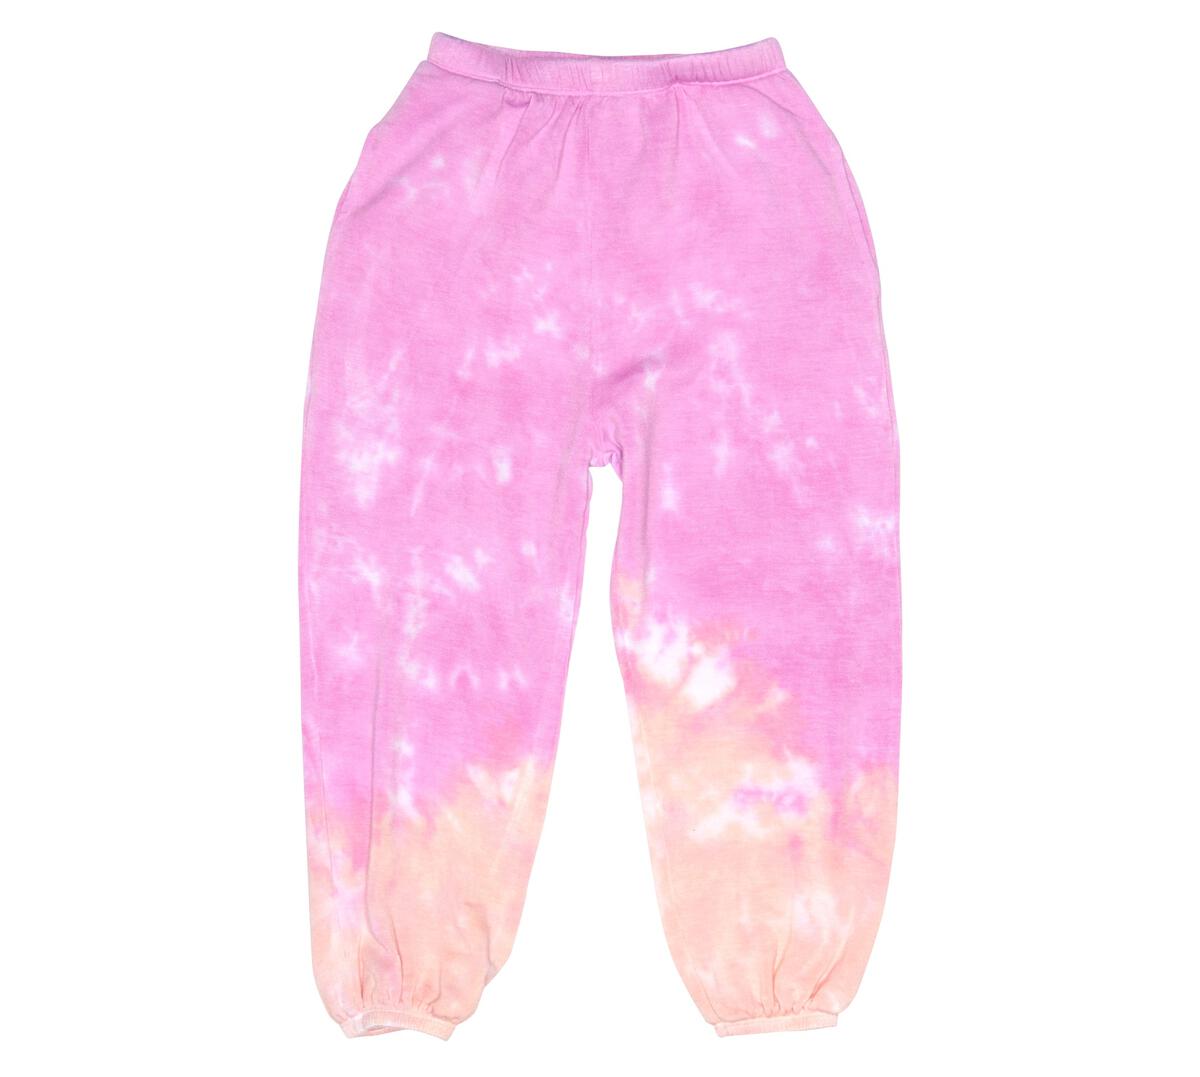 Gym Sweats - Popsicle Children's Clothing Fairwell 